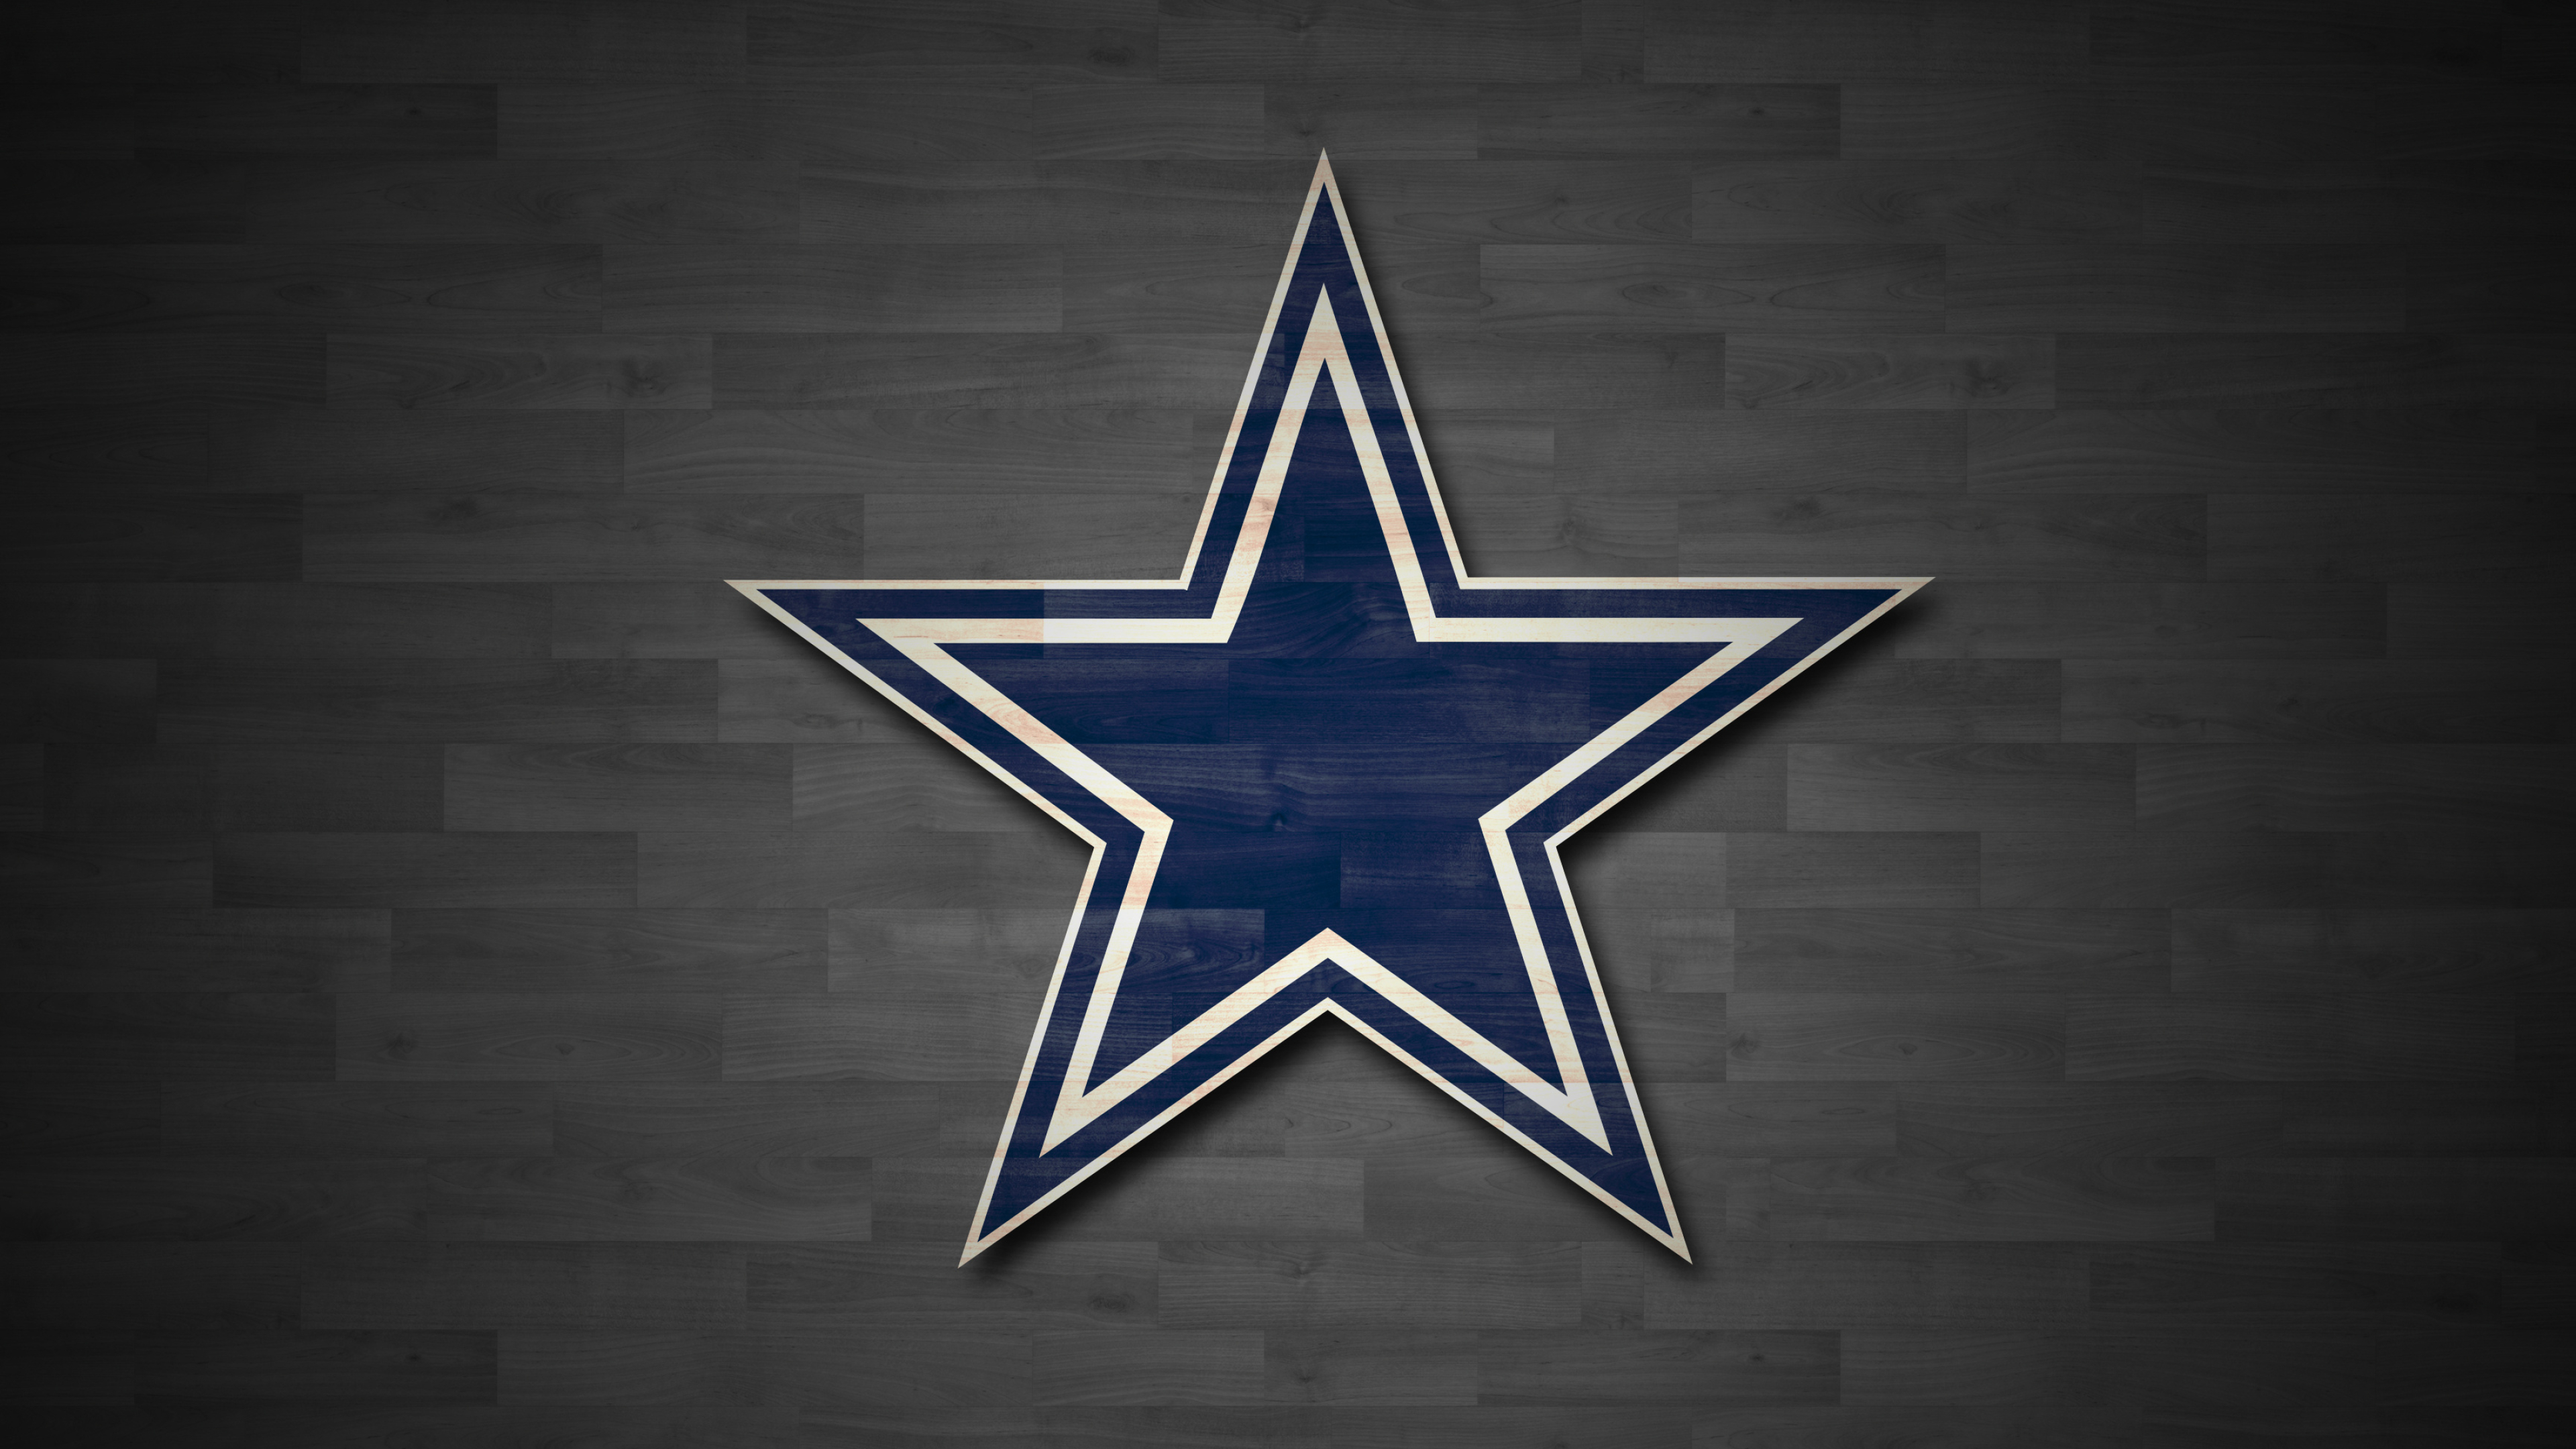 Dallas Cowboys: The team compete in the NFL as a member club of the NFC East division. 3840x2160 4K Background.